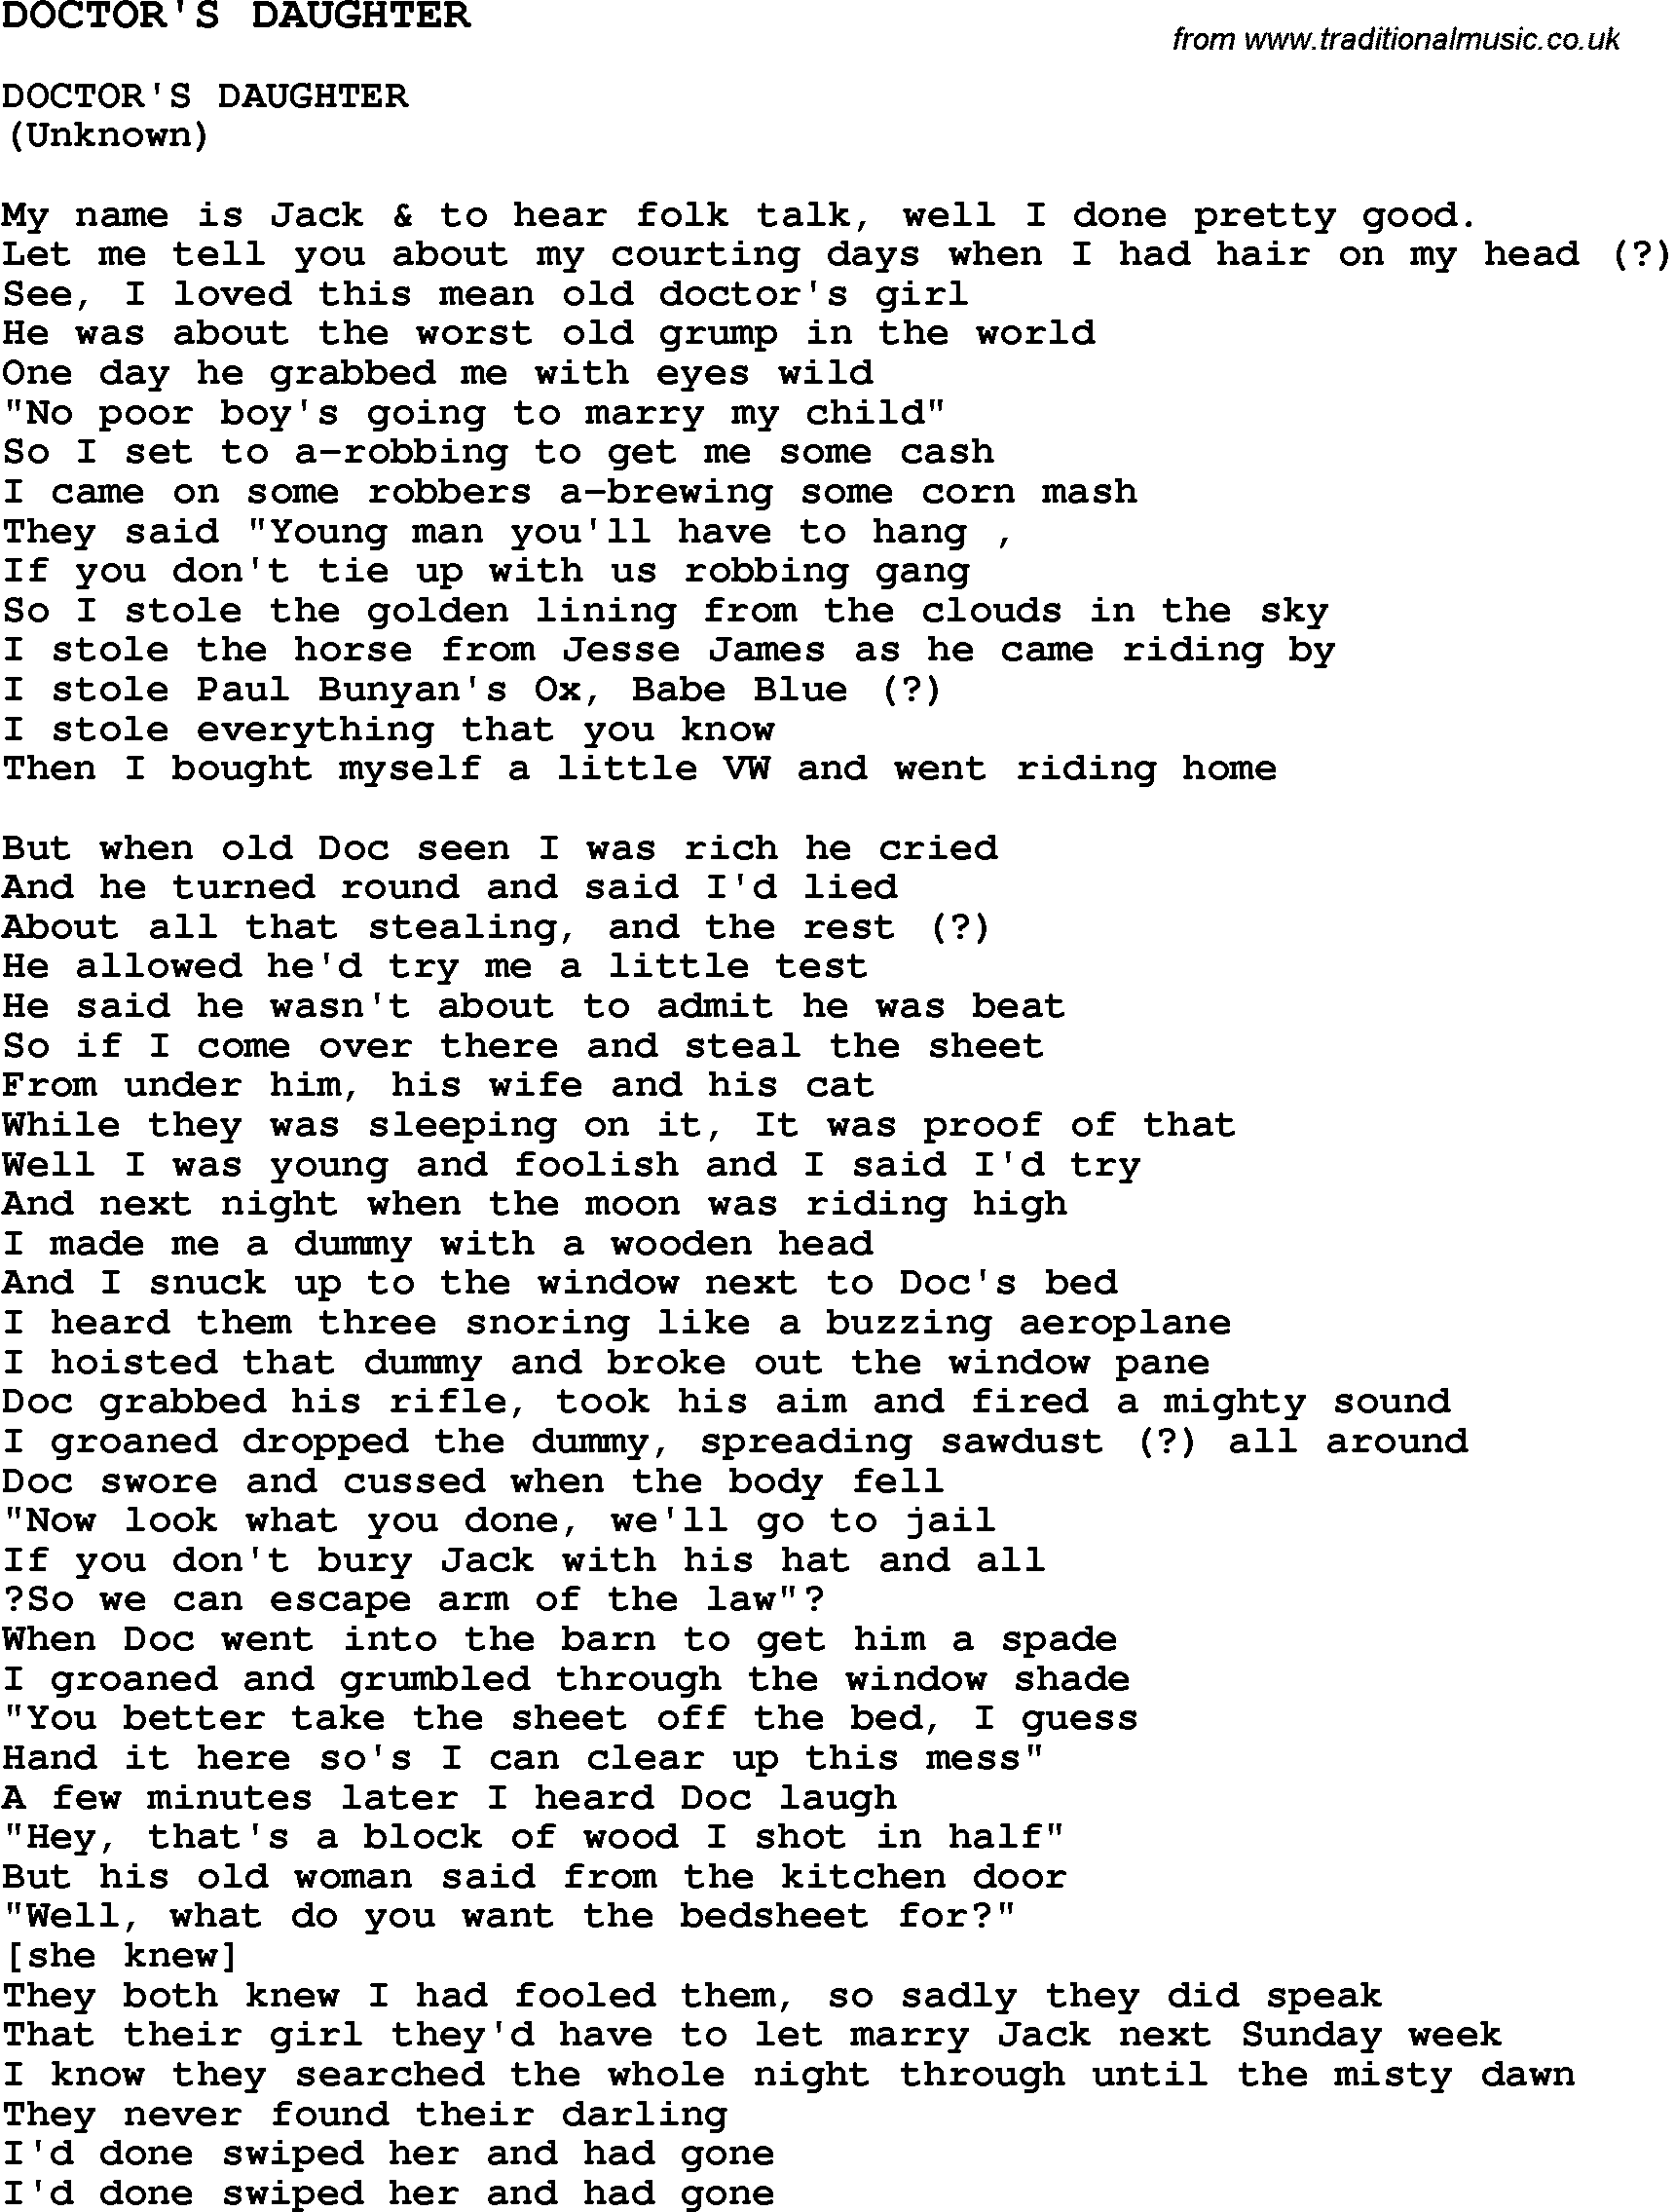 Skiffle Song Lyrics for Doctor's Daughter.